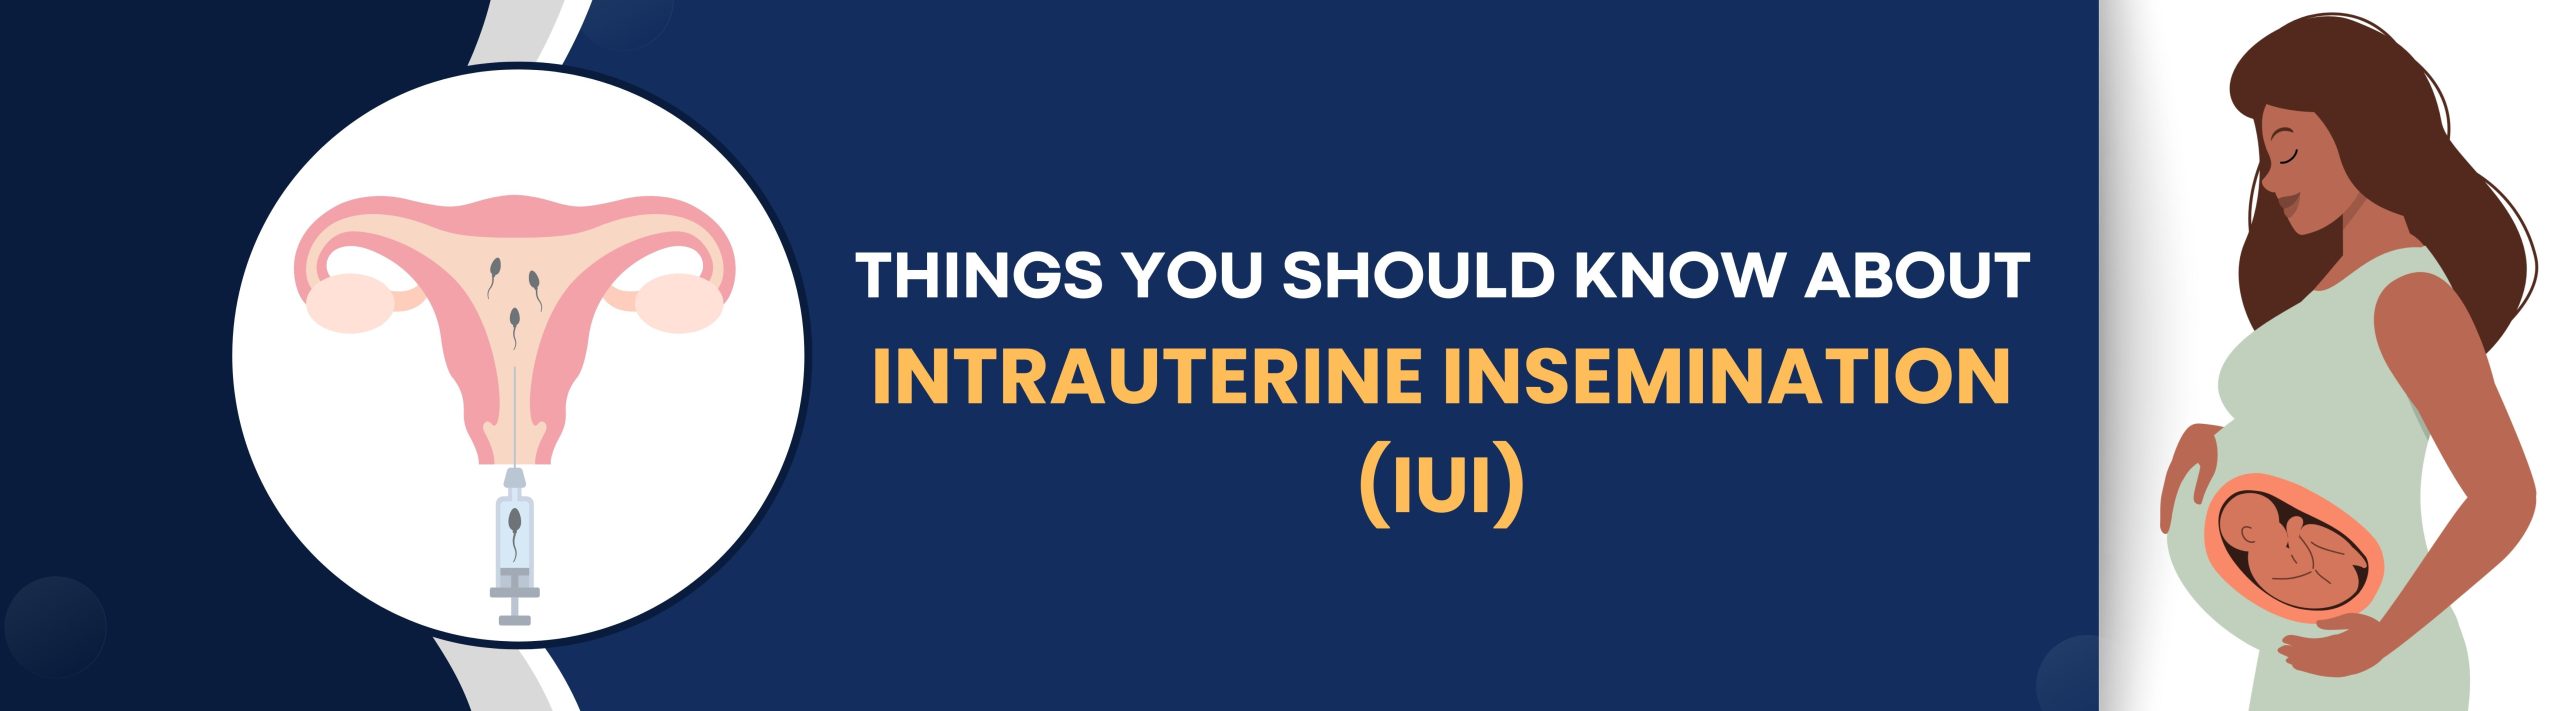 Things You Should Know About Intrauterine Insemination (IUI)